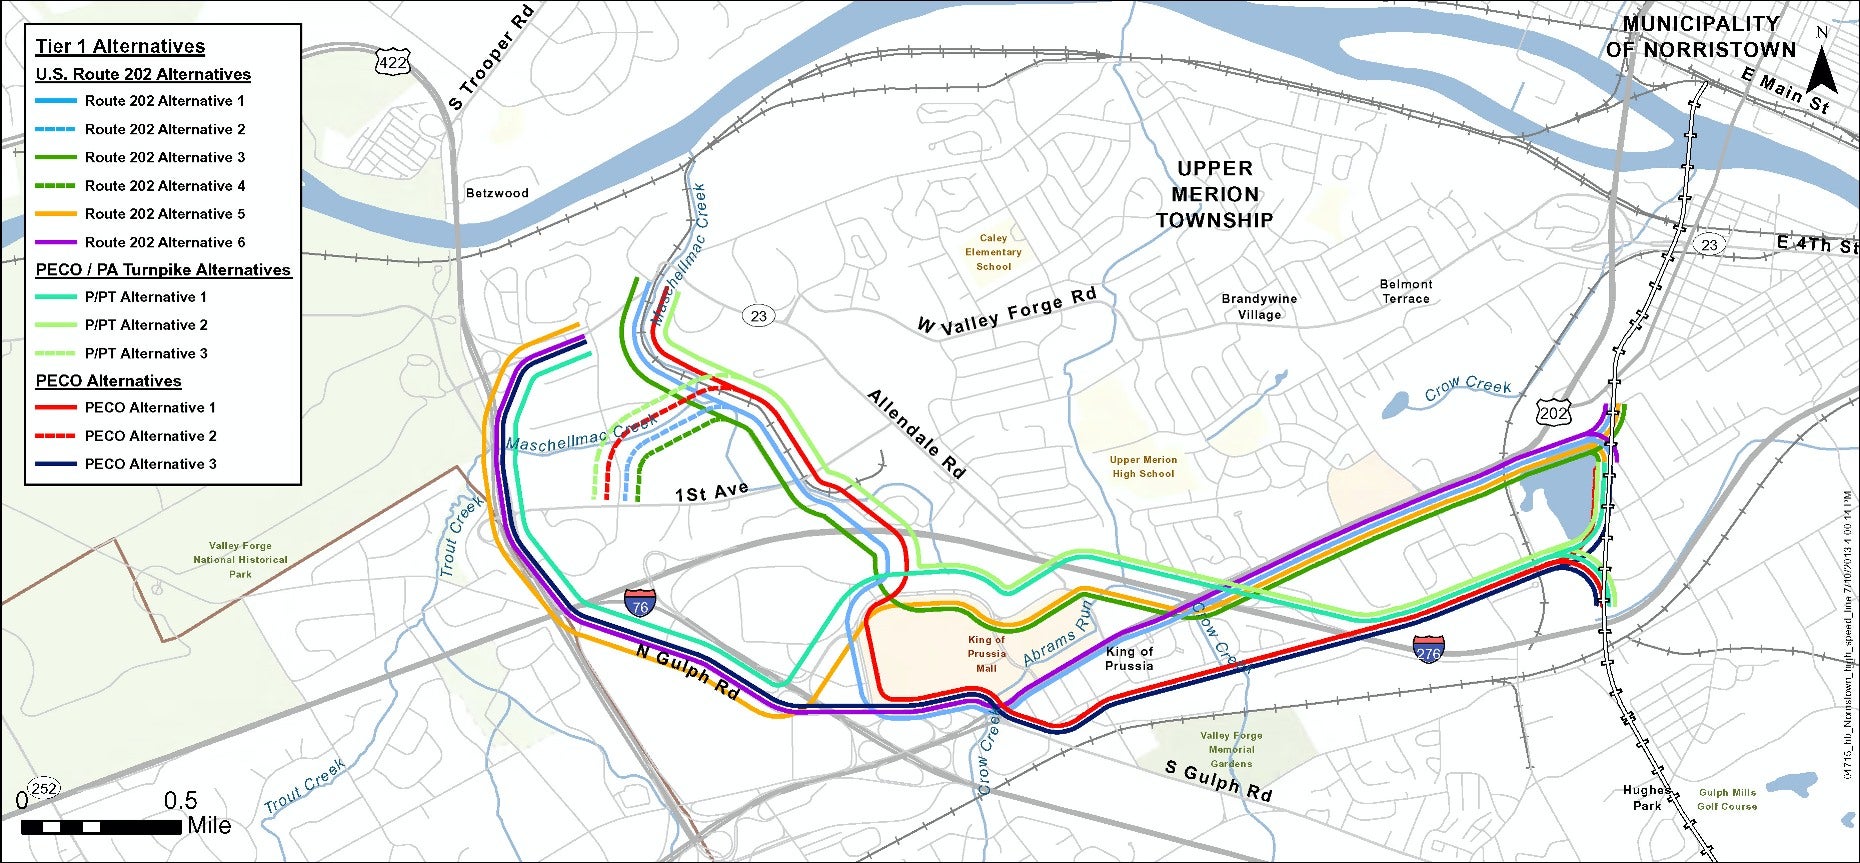 SEPTA has narrowed its options to these route alternatives, Map courtesy of SEPTA